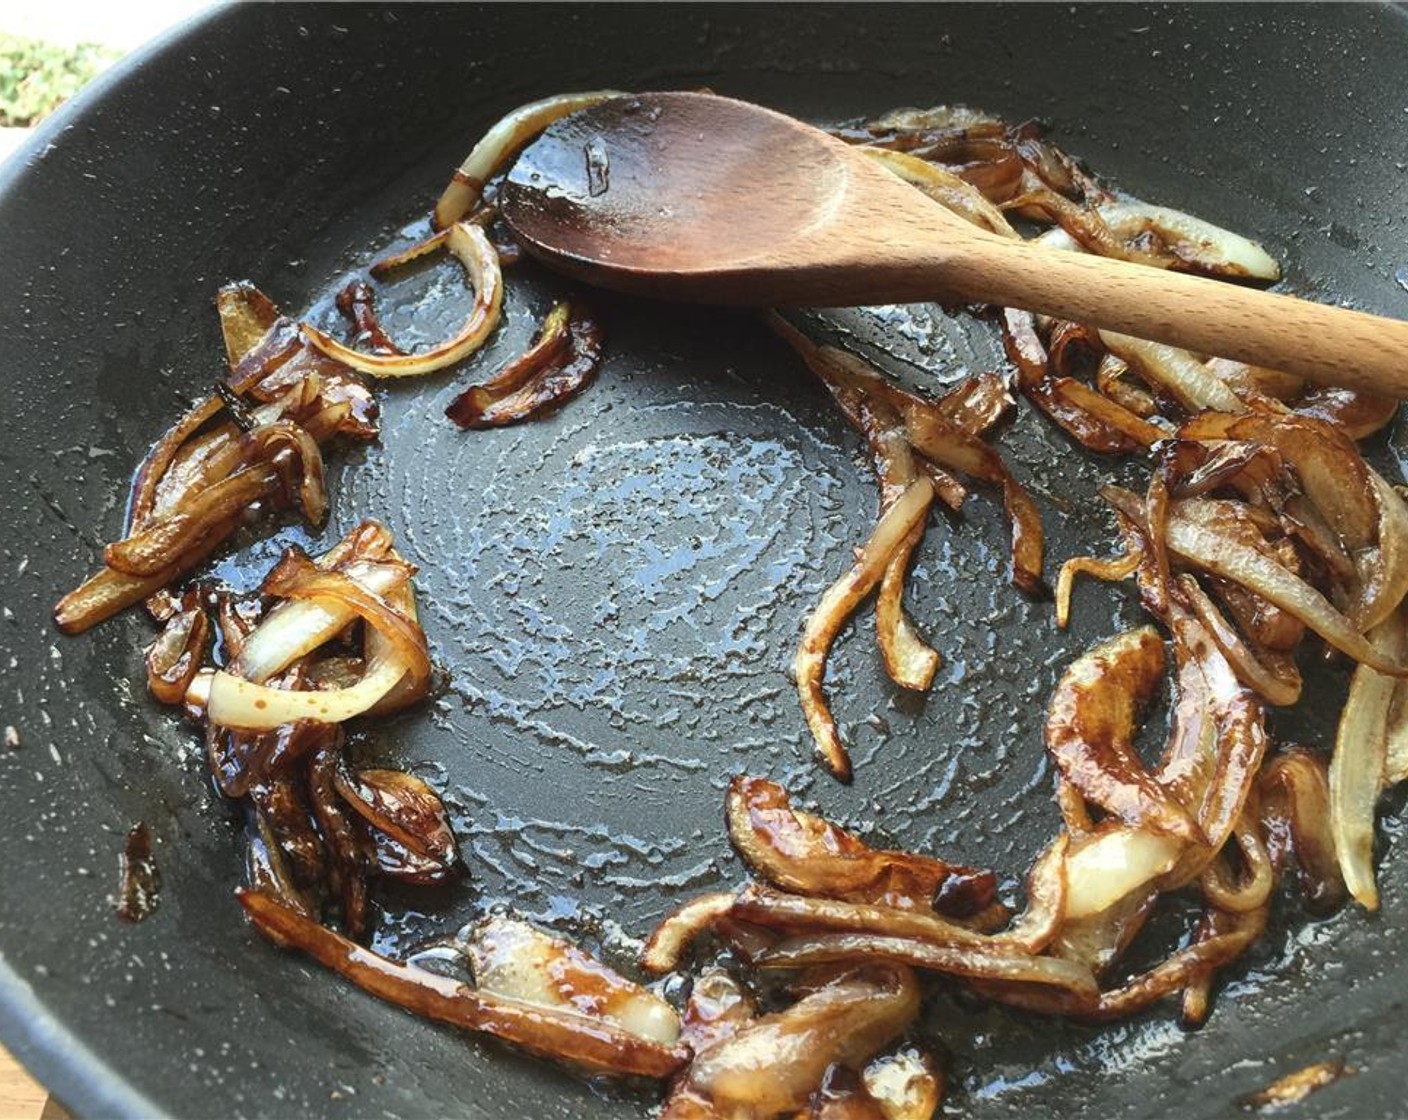 step 6 Add in the Blackstrap Molasses (1 tsp) and toss the onions around until covered. Set aside for later.